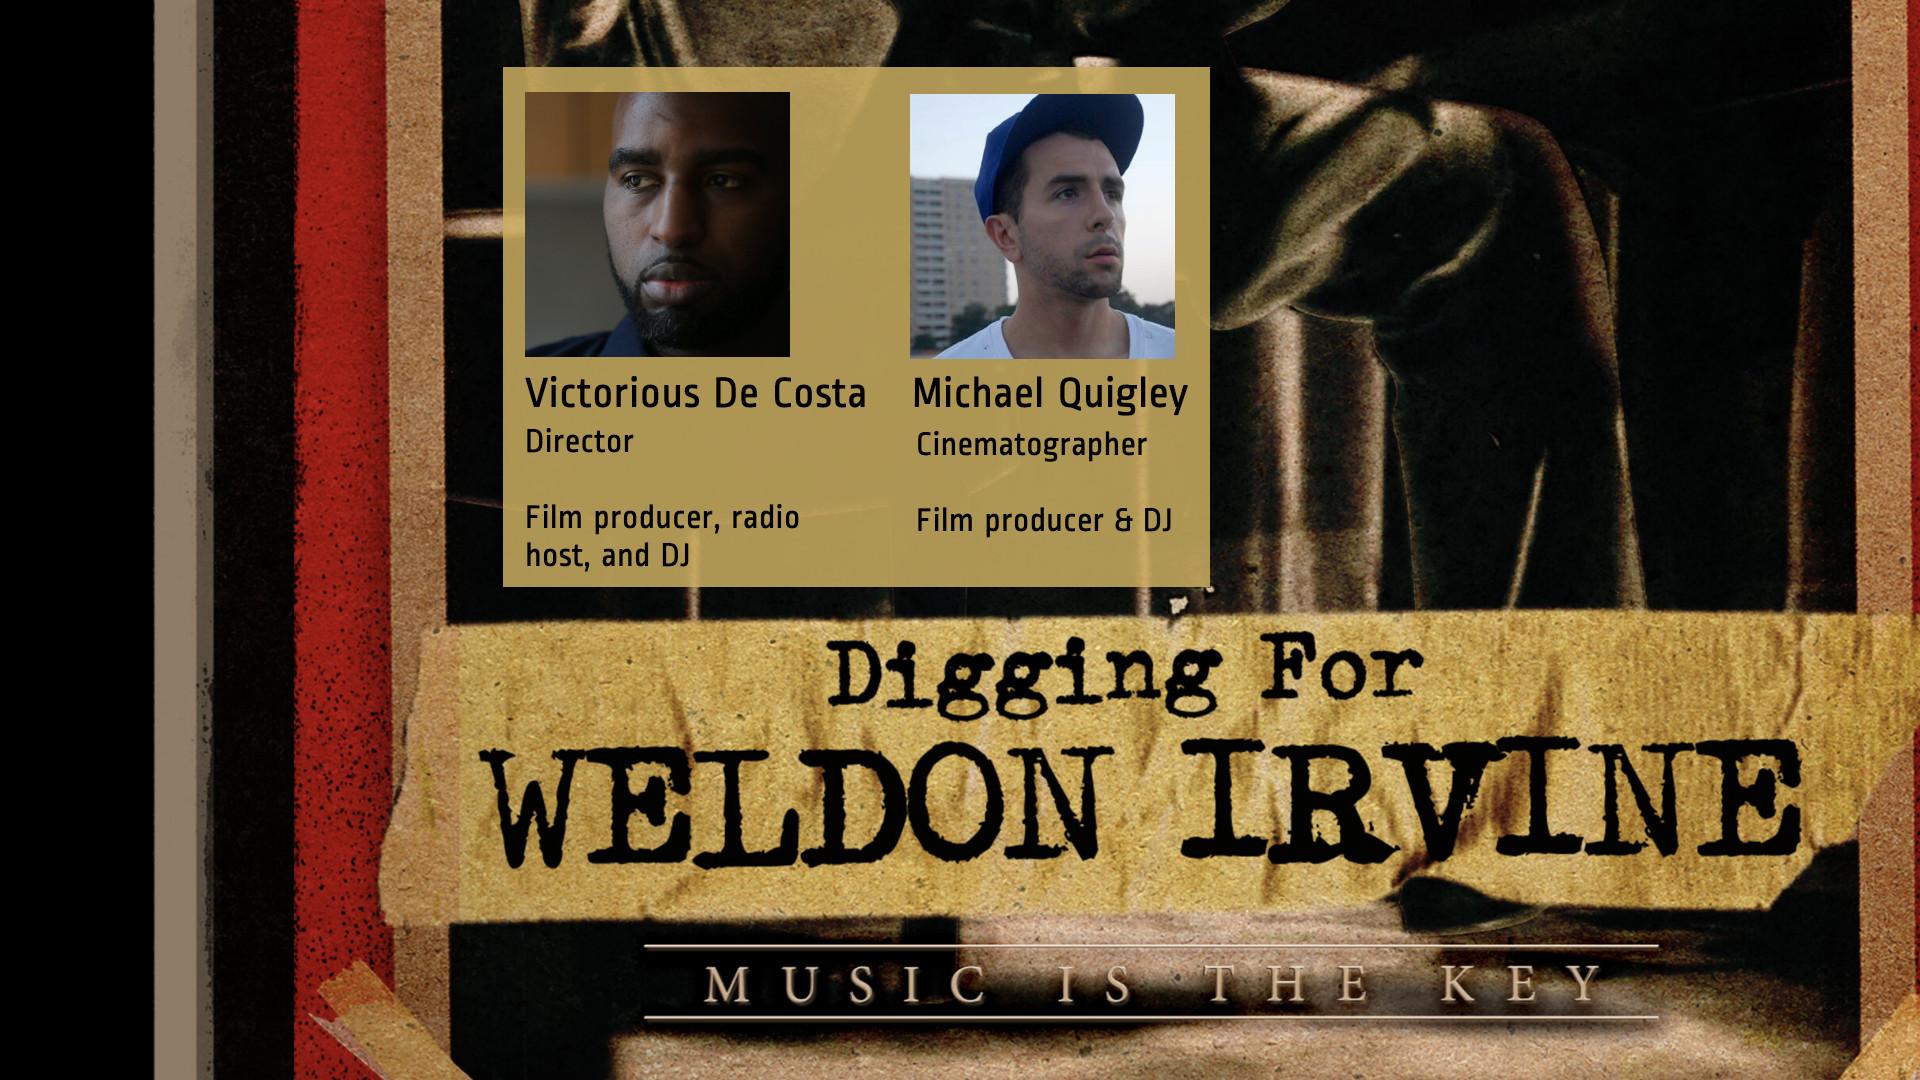 Digging for Weldon Irvine Q&A Panel - Oct 18th